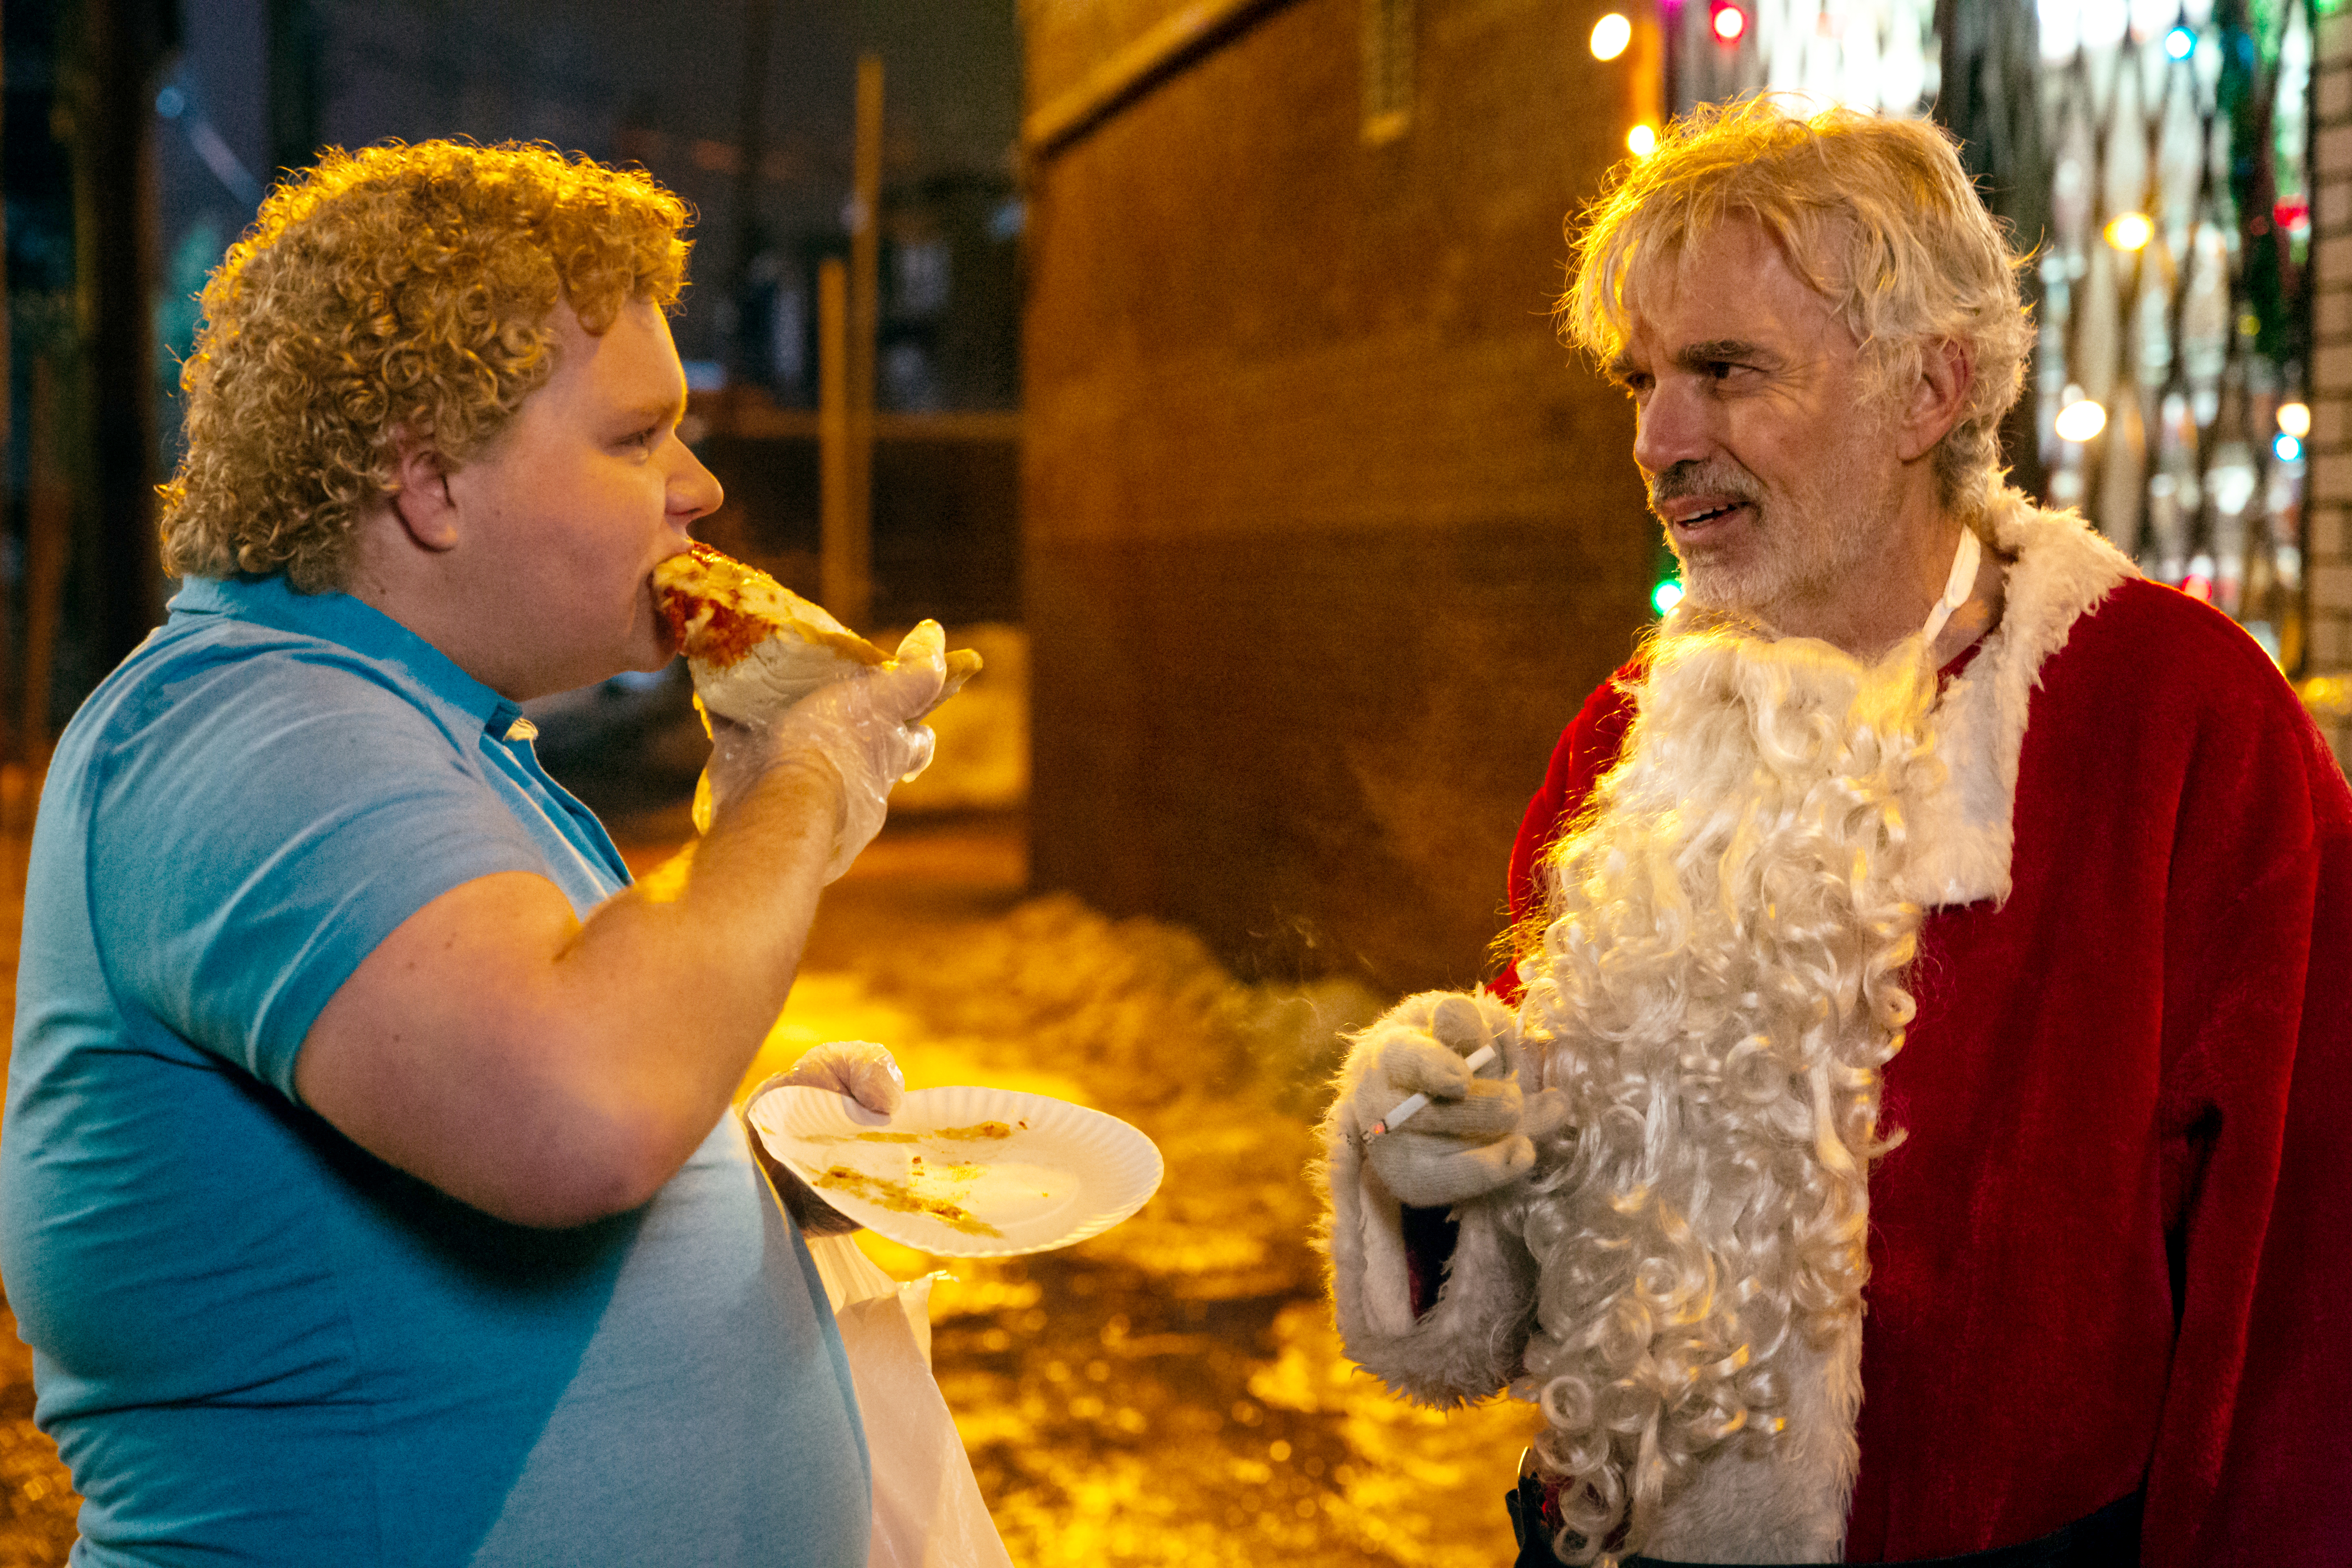 BS2-05271_R (l-r) Brett Kelly stars as Thurman Merman and Billy Bob Thornton as Willie Soke in BAD SANTA 2, a Broad Green Pictures release. Credit: Jan Thijs / Broad Green Pictures